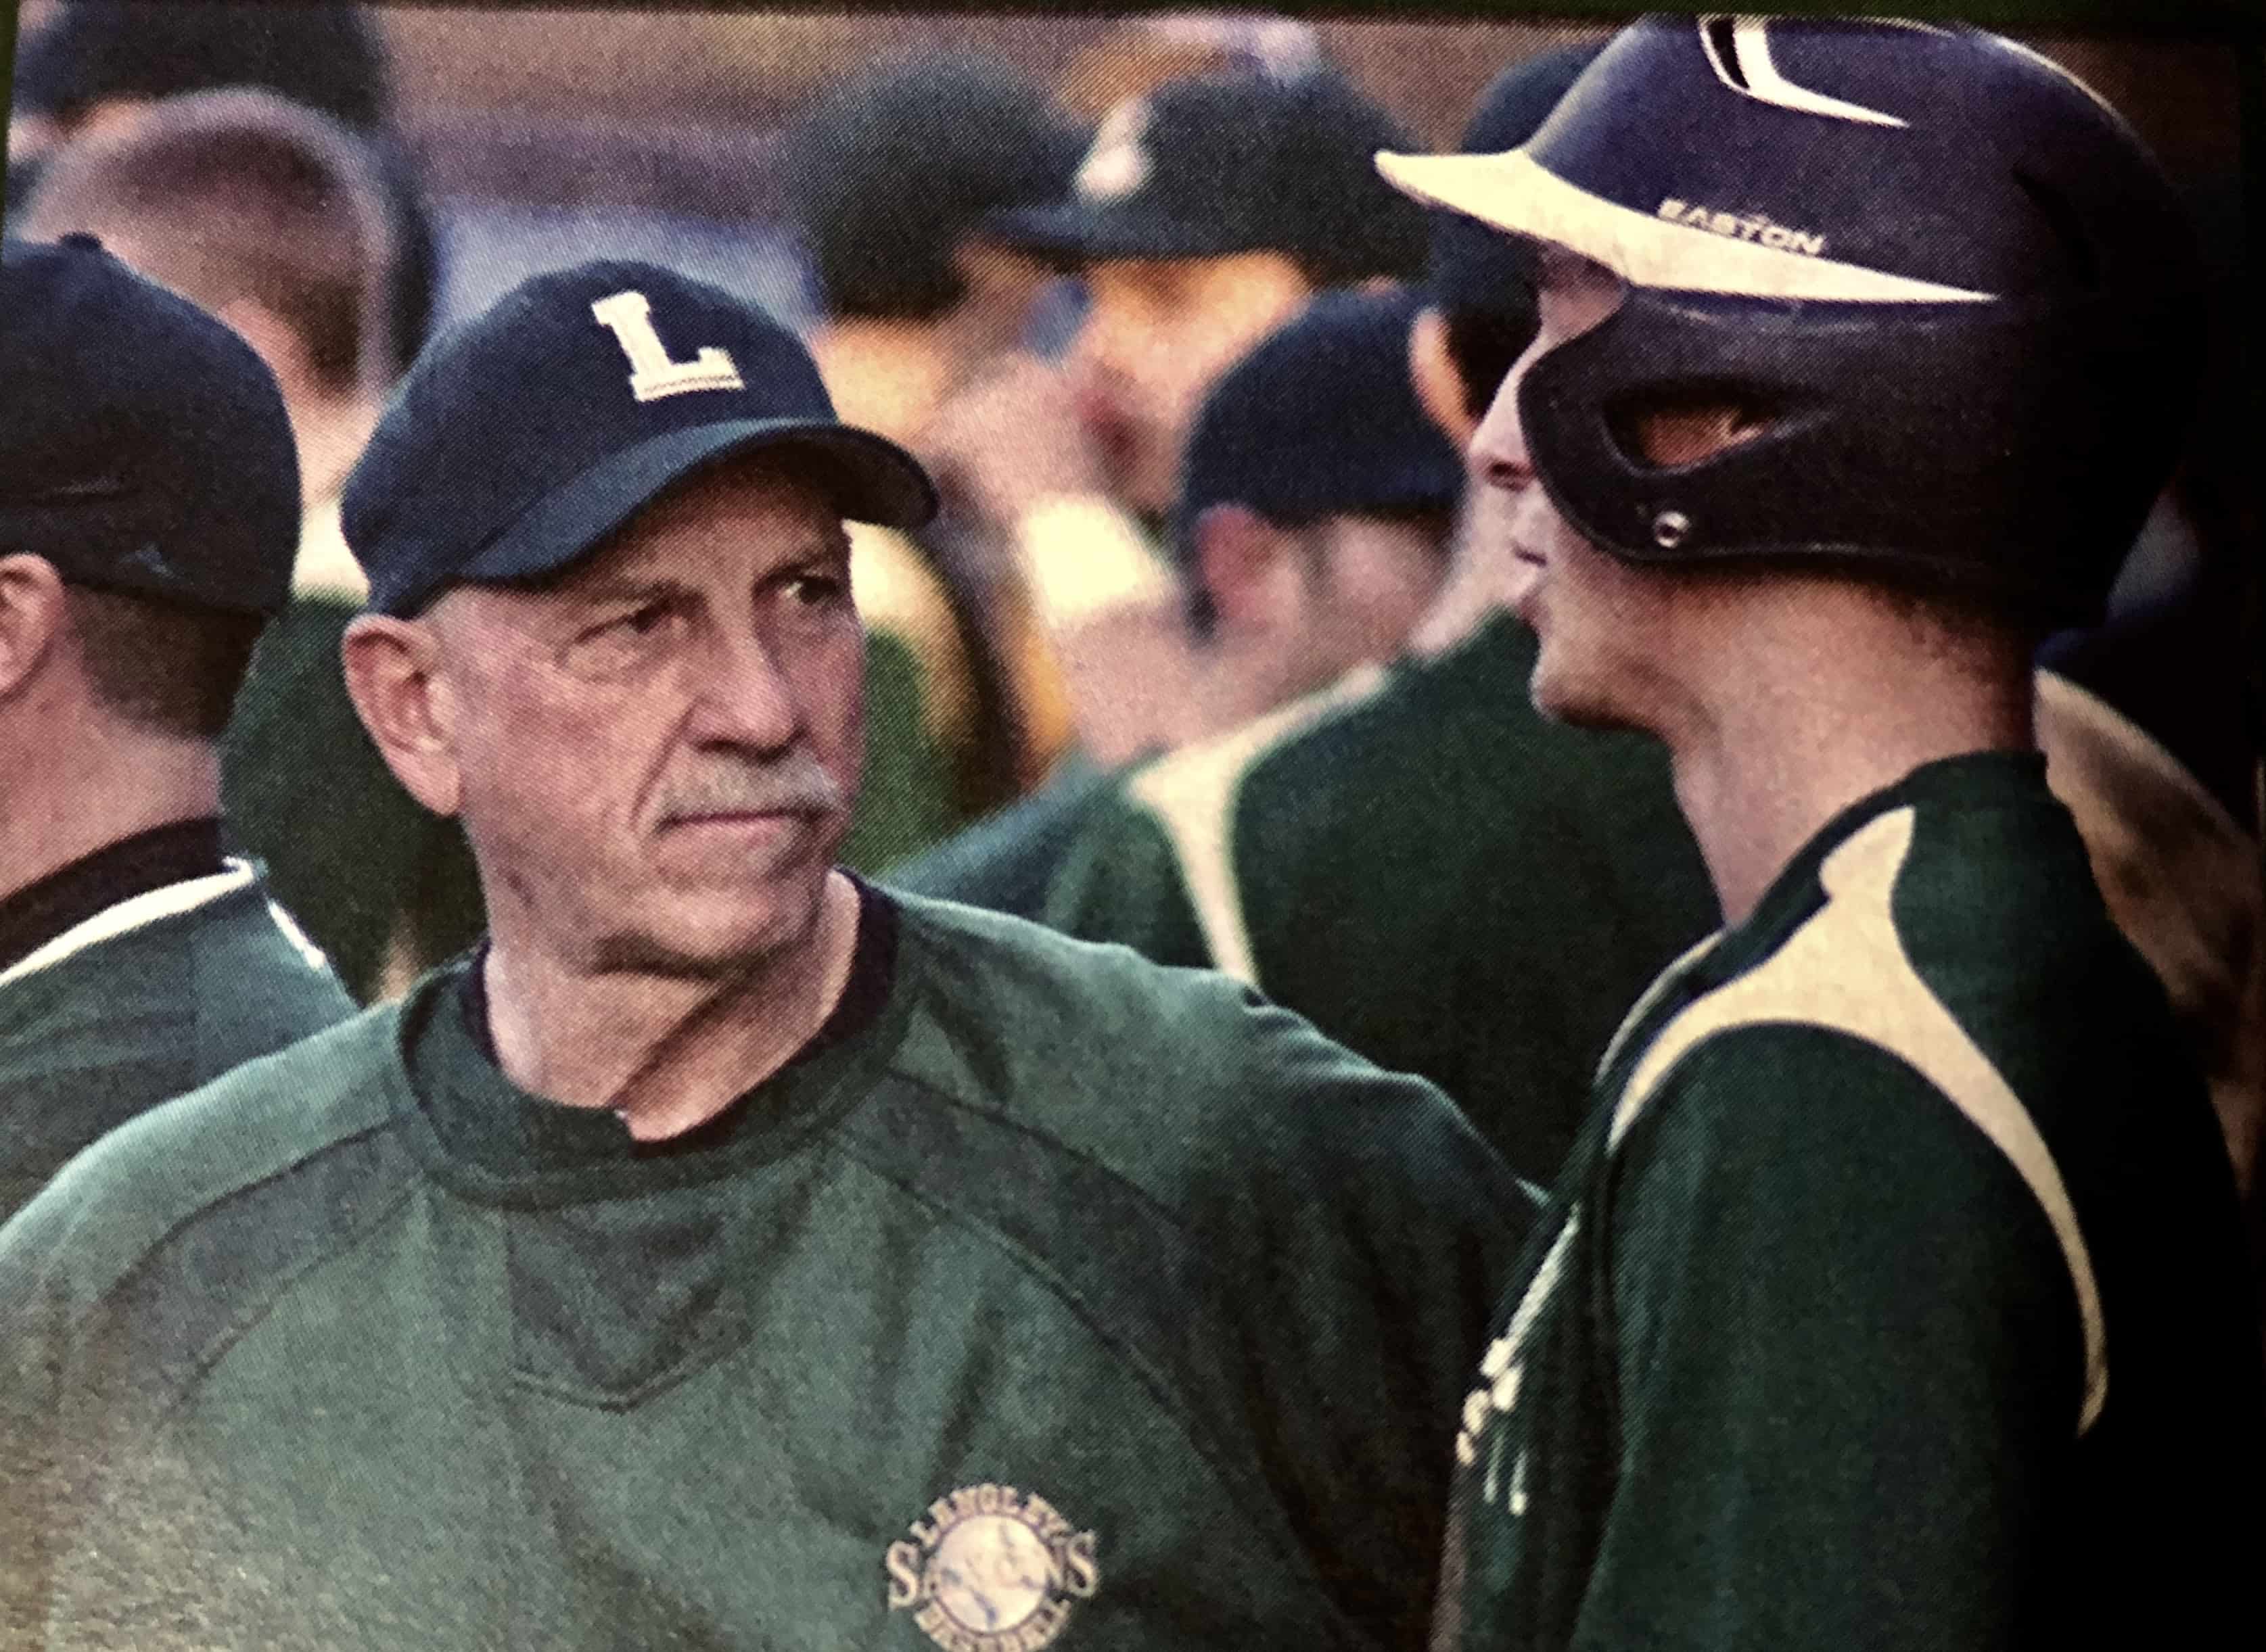 Vic Price - Assistant Coach Langley High School Baseball